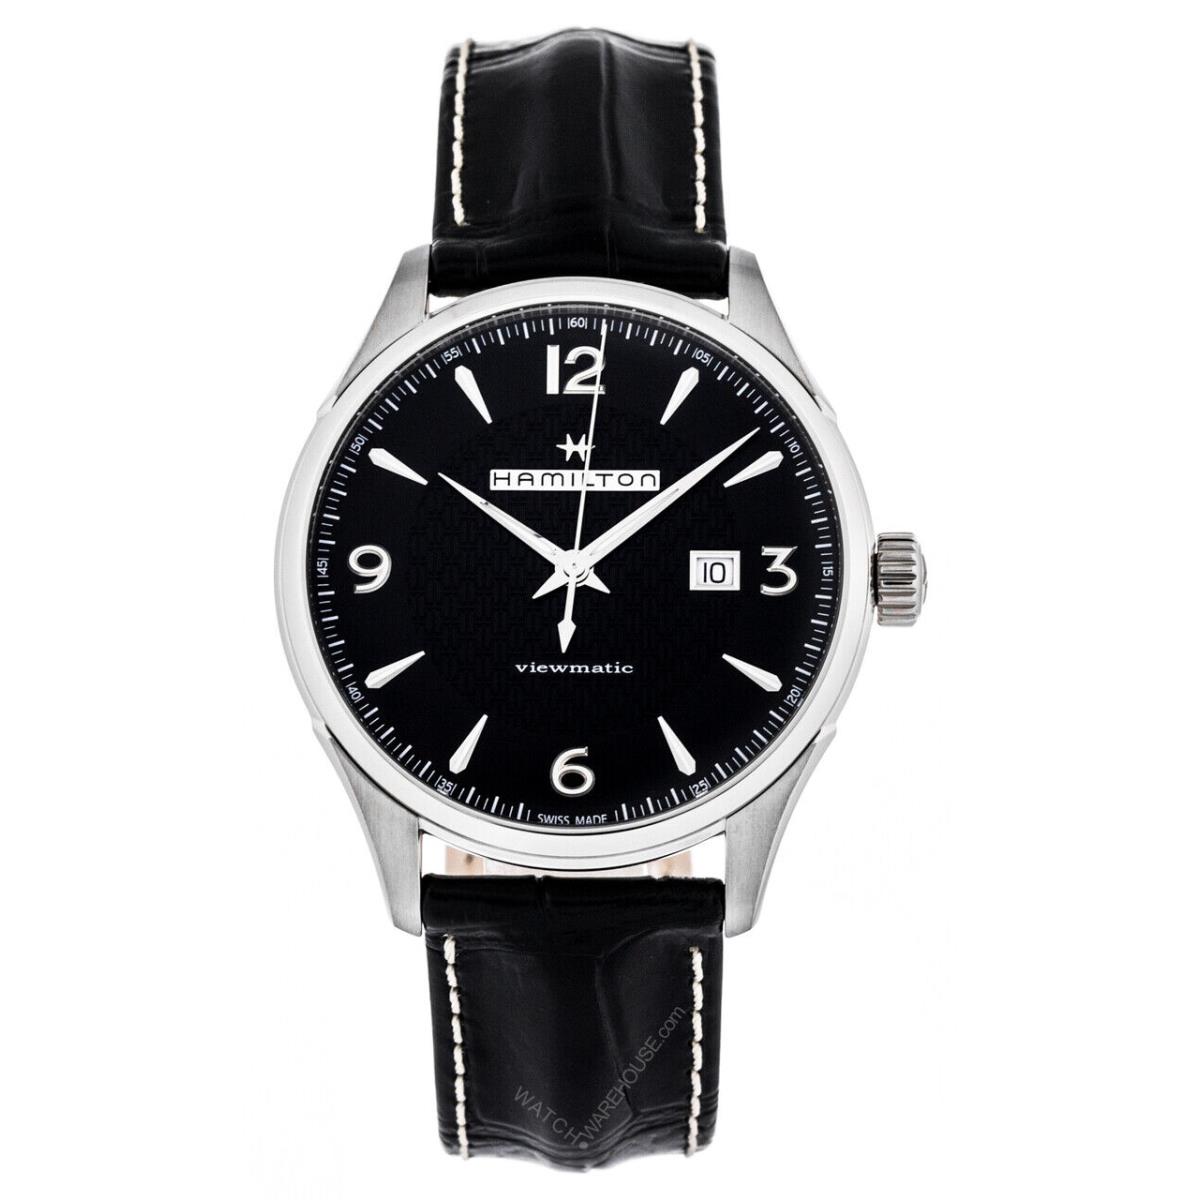 Hamilton Jazzmaster Viewmatic Black Dial Black Leather Band Auto Watch H32755731